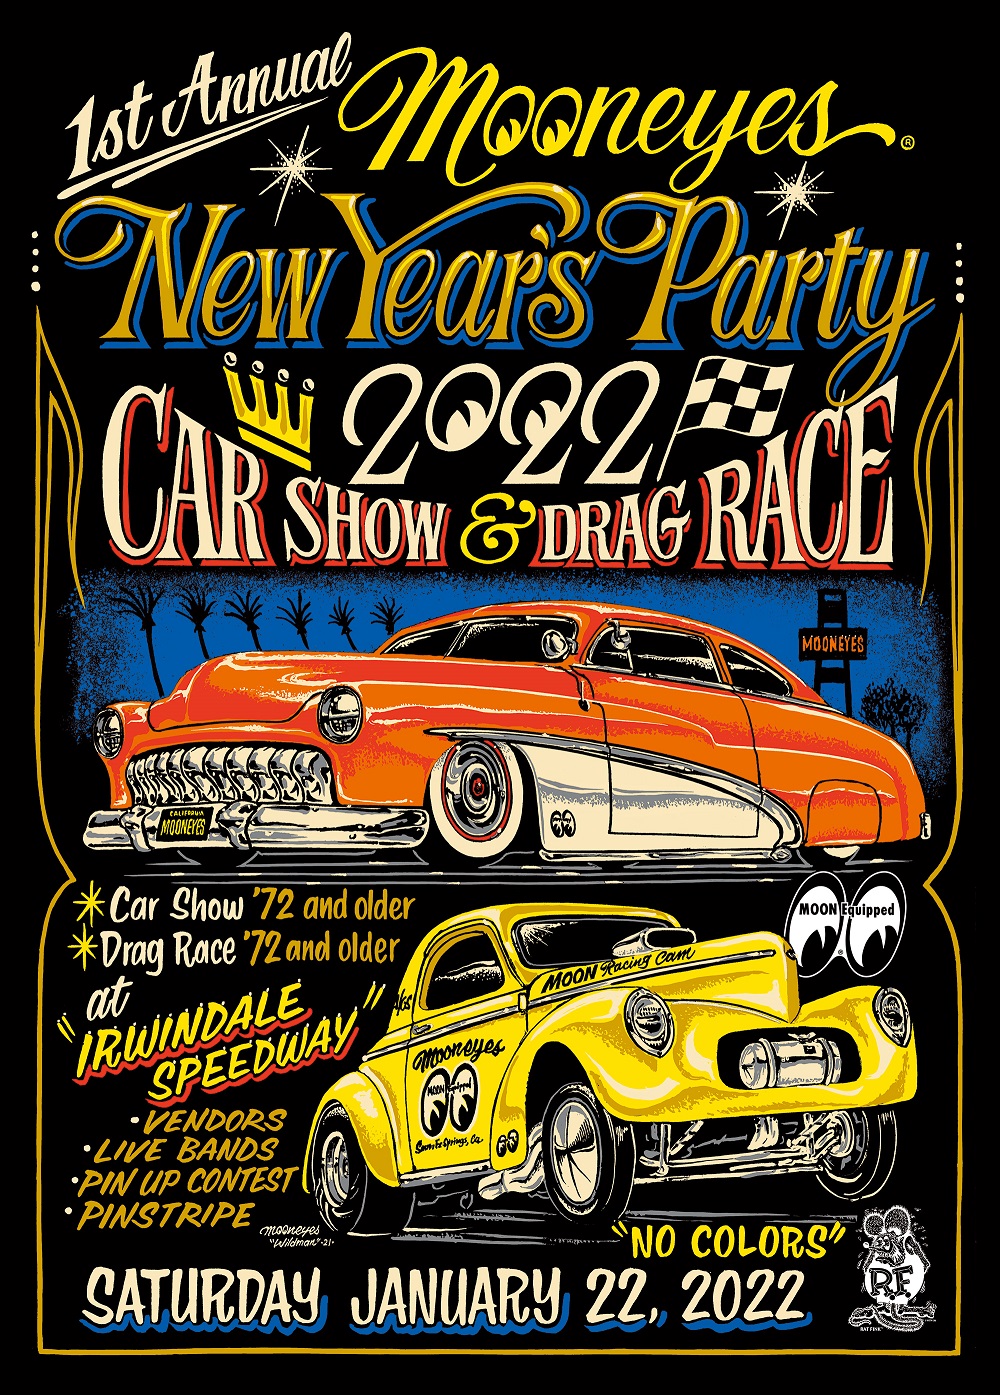 Mooneyes New Year’s Party Car Show & Drag Race